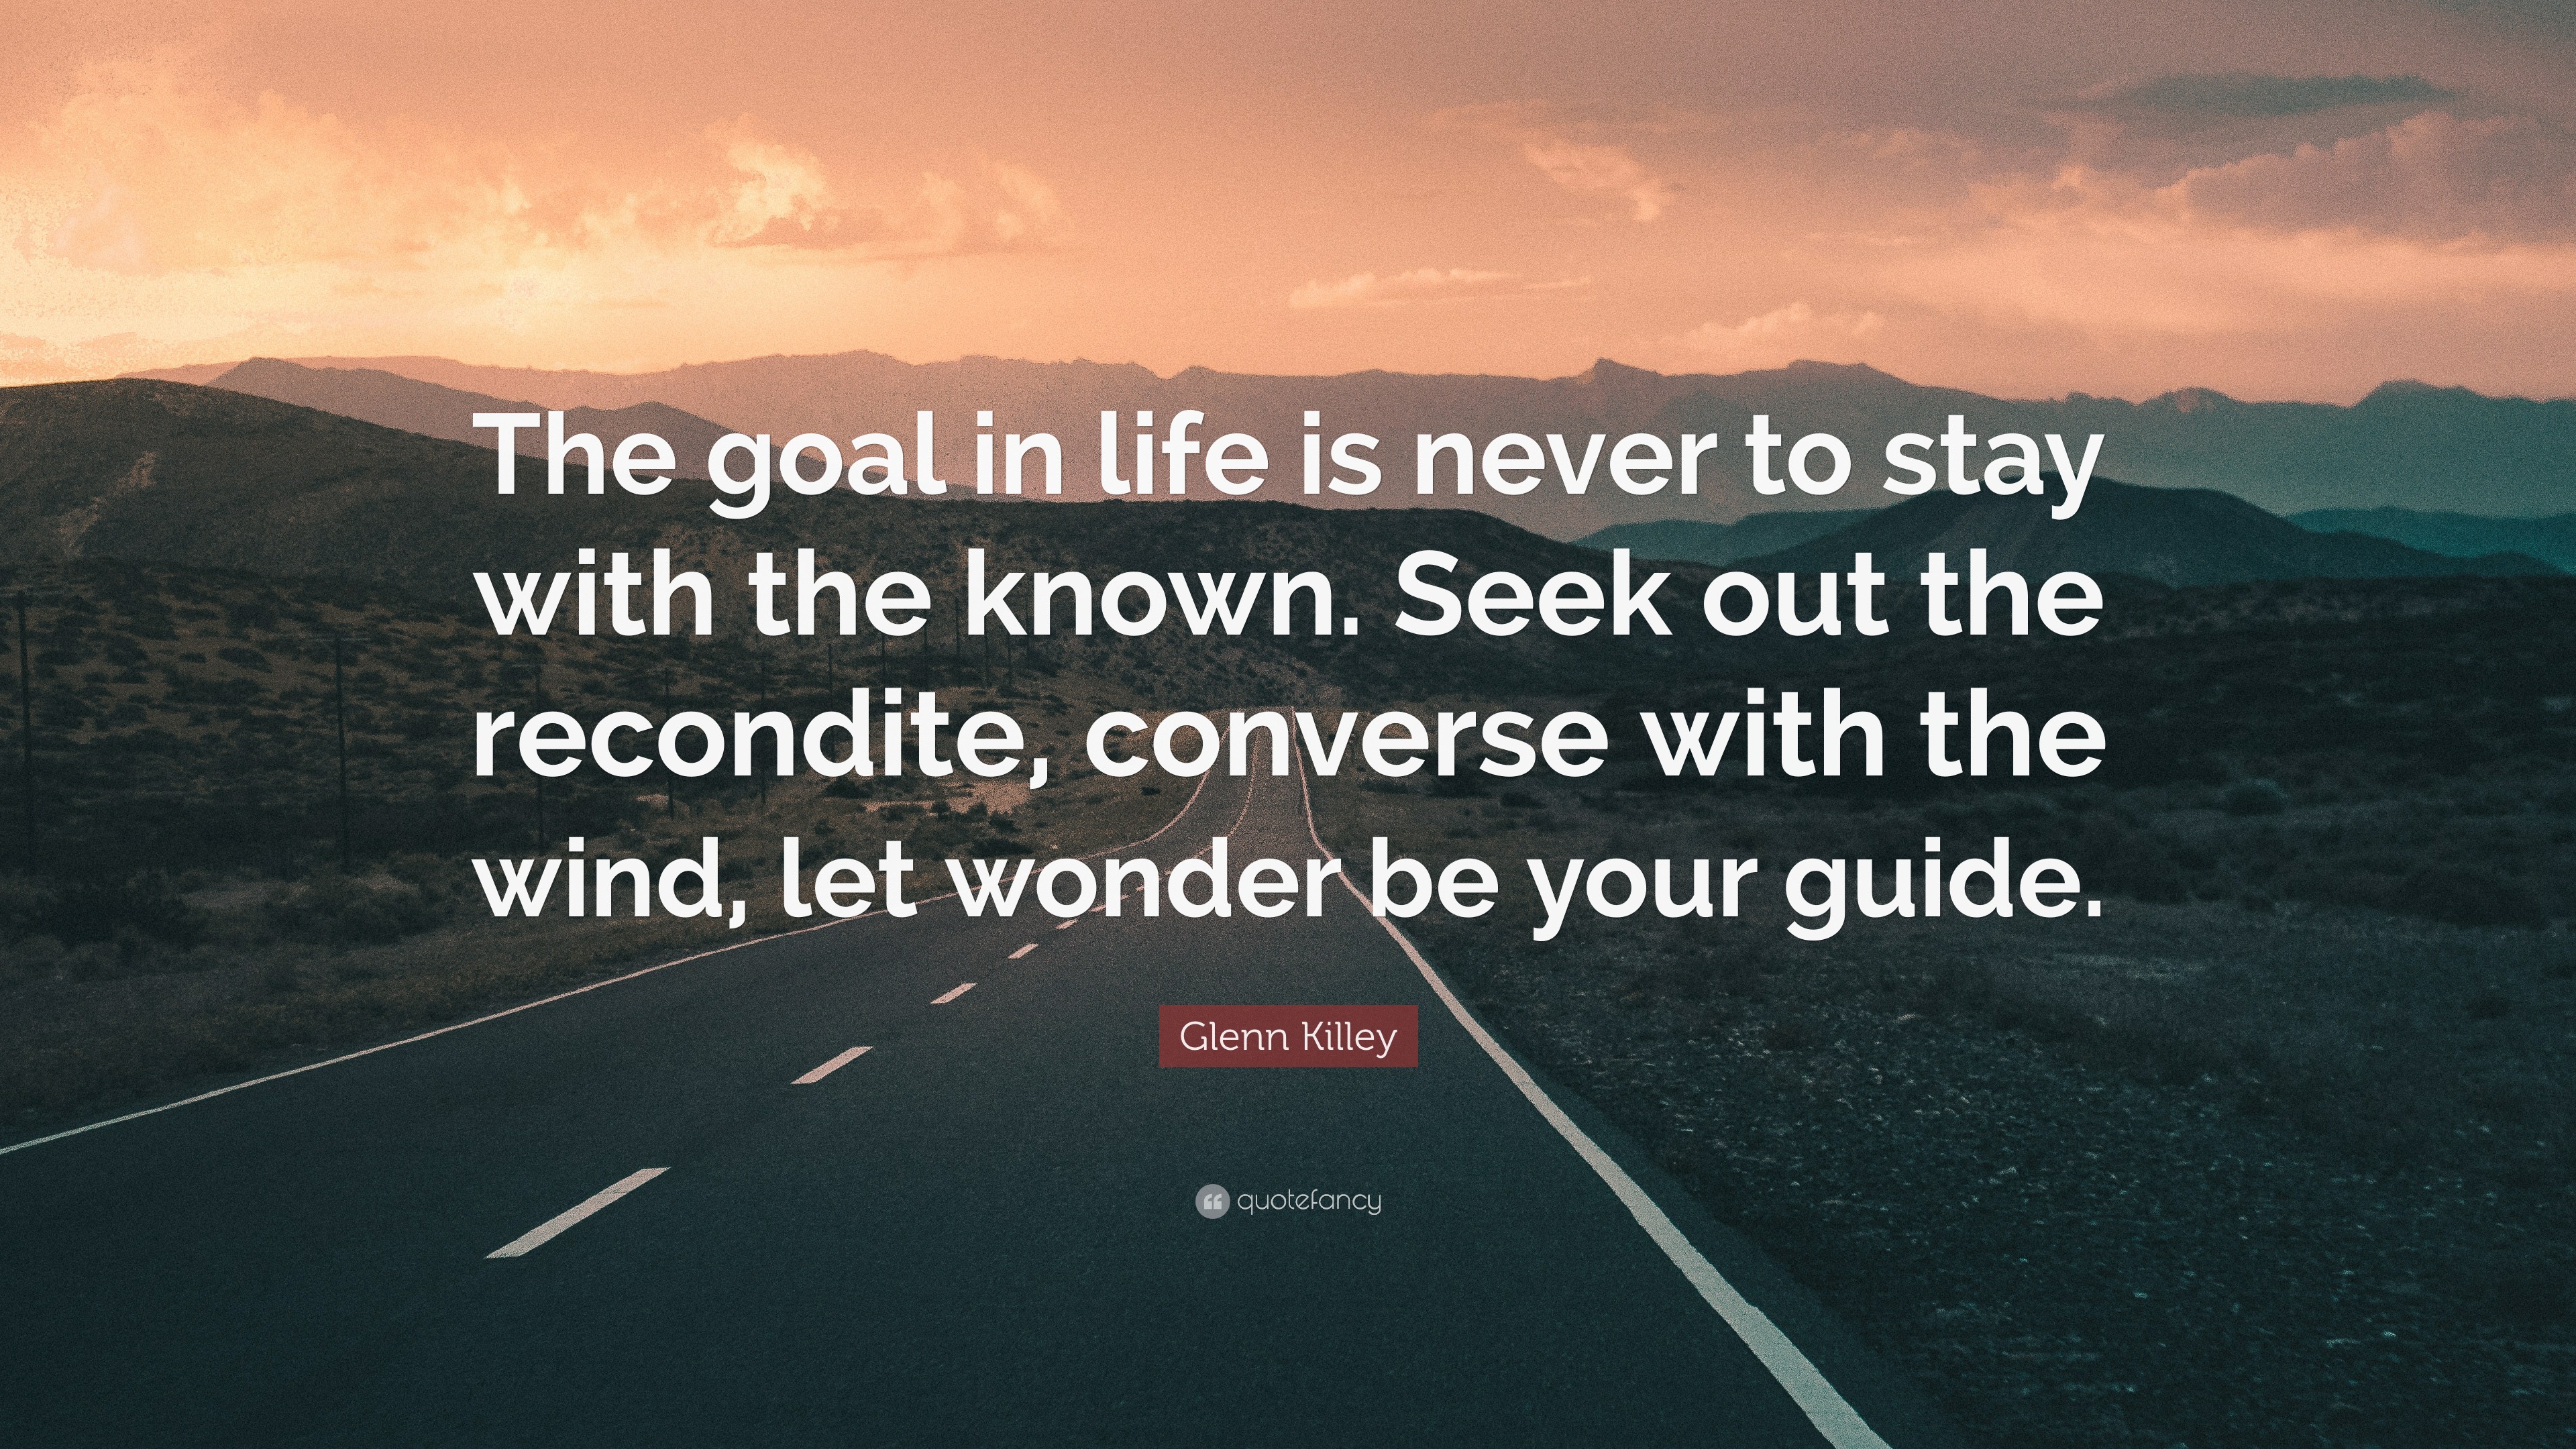 Glenn Killey Quote: “The goal in life is never to stay with the known ...